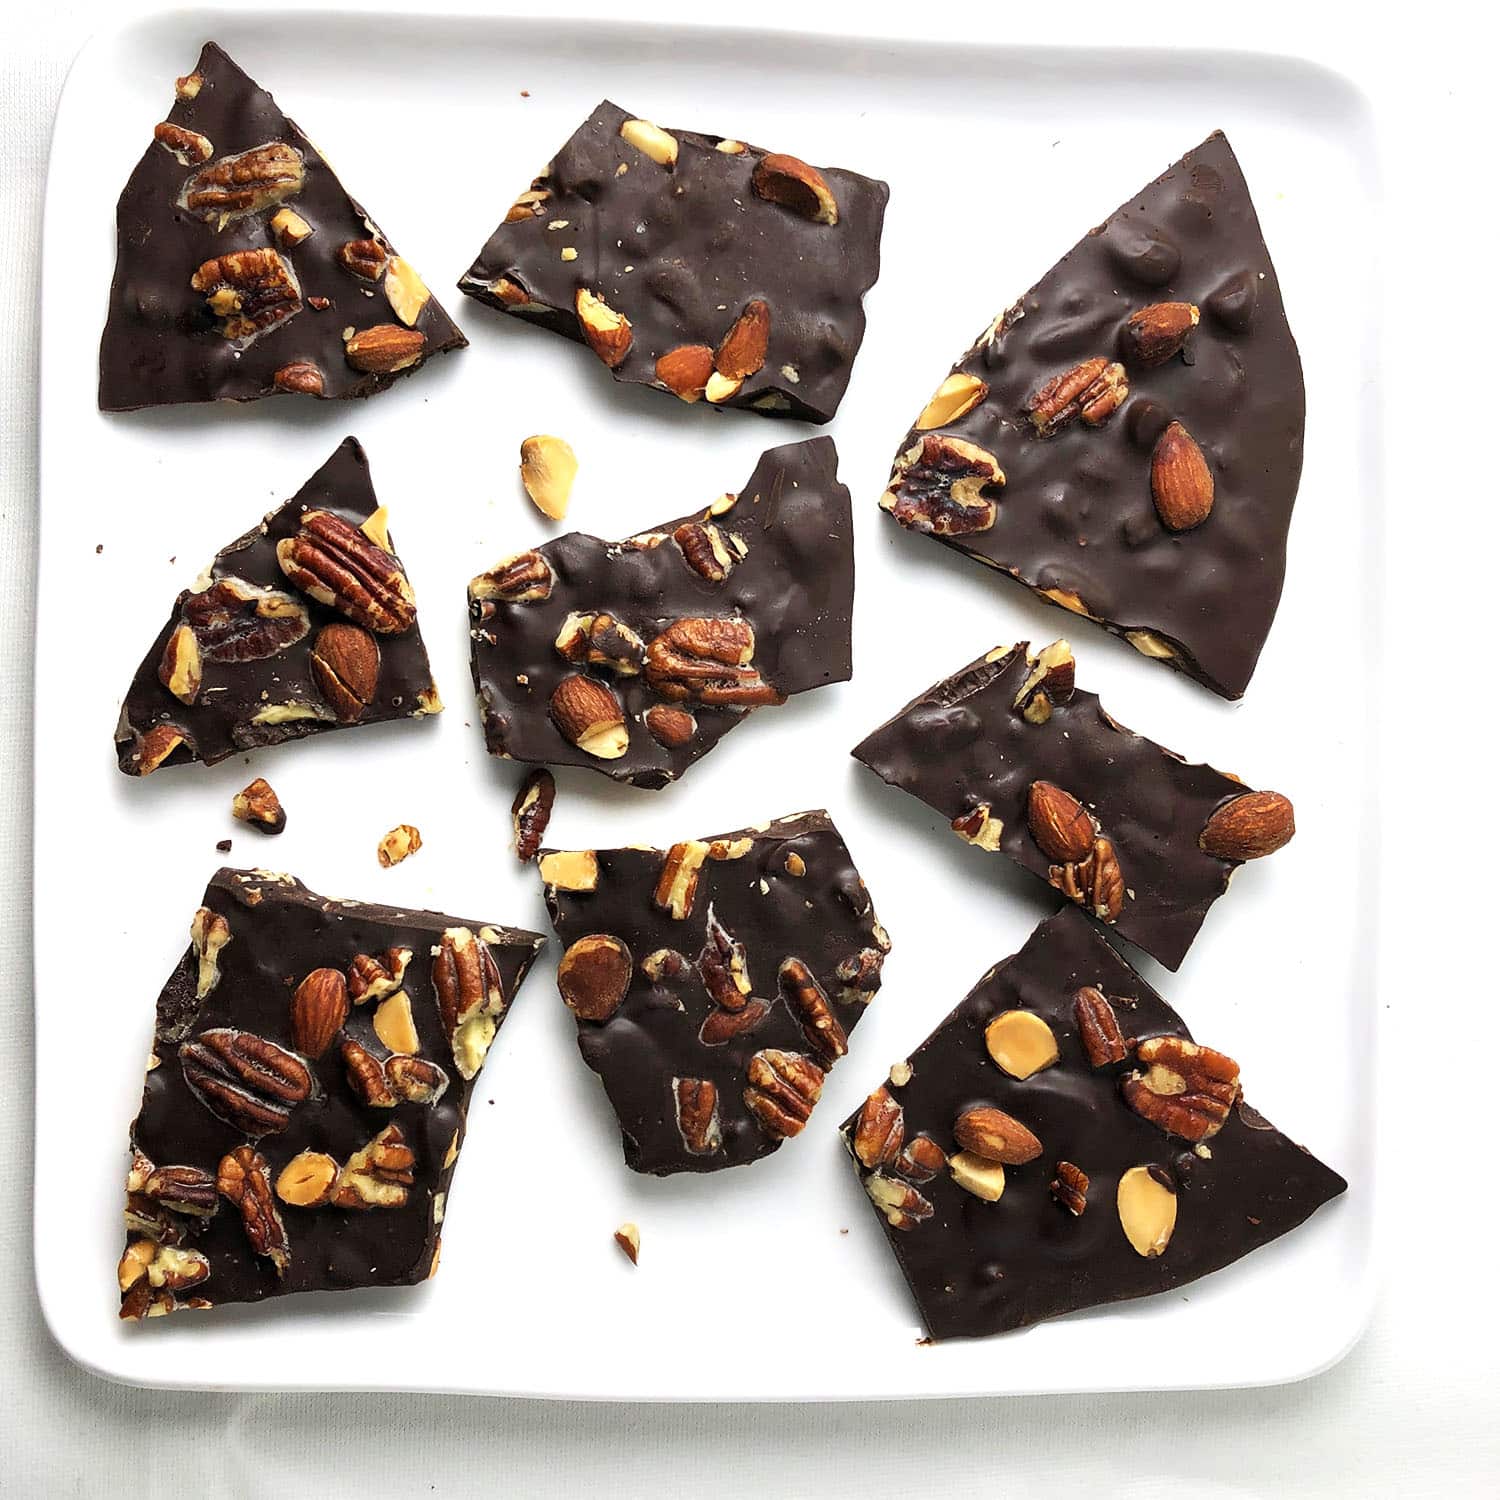 Top-down view of dark chocolate bark studded with buttery pecans and smoked almonds, on a square white plate.